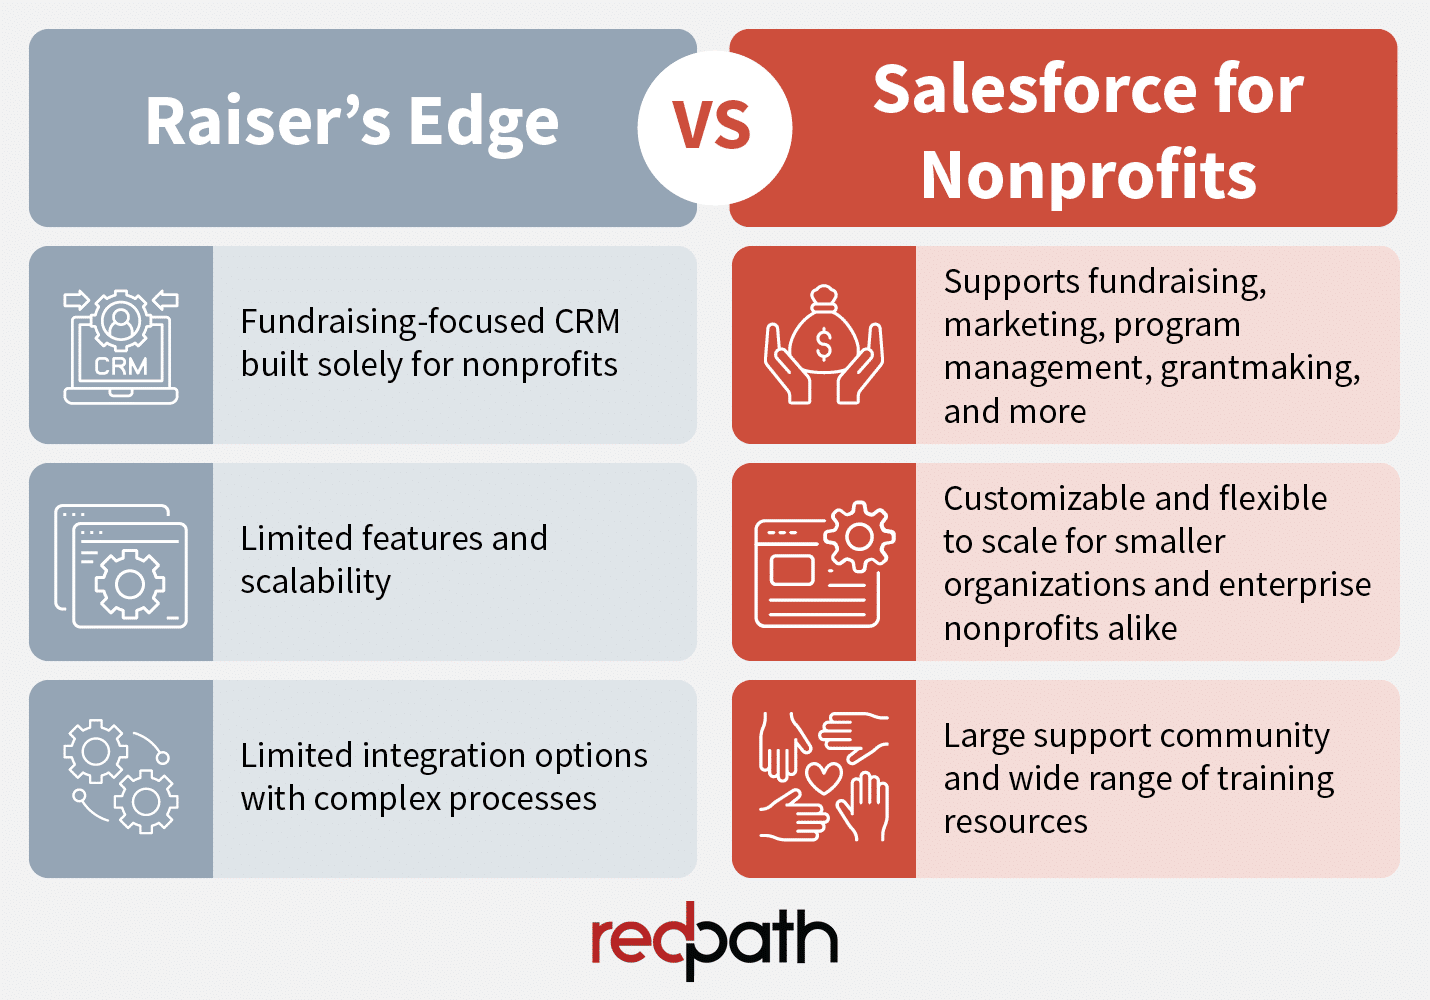 A list of Raiser’s Edge vs Salesforce features, discussed in the text below